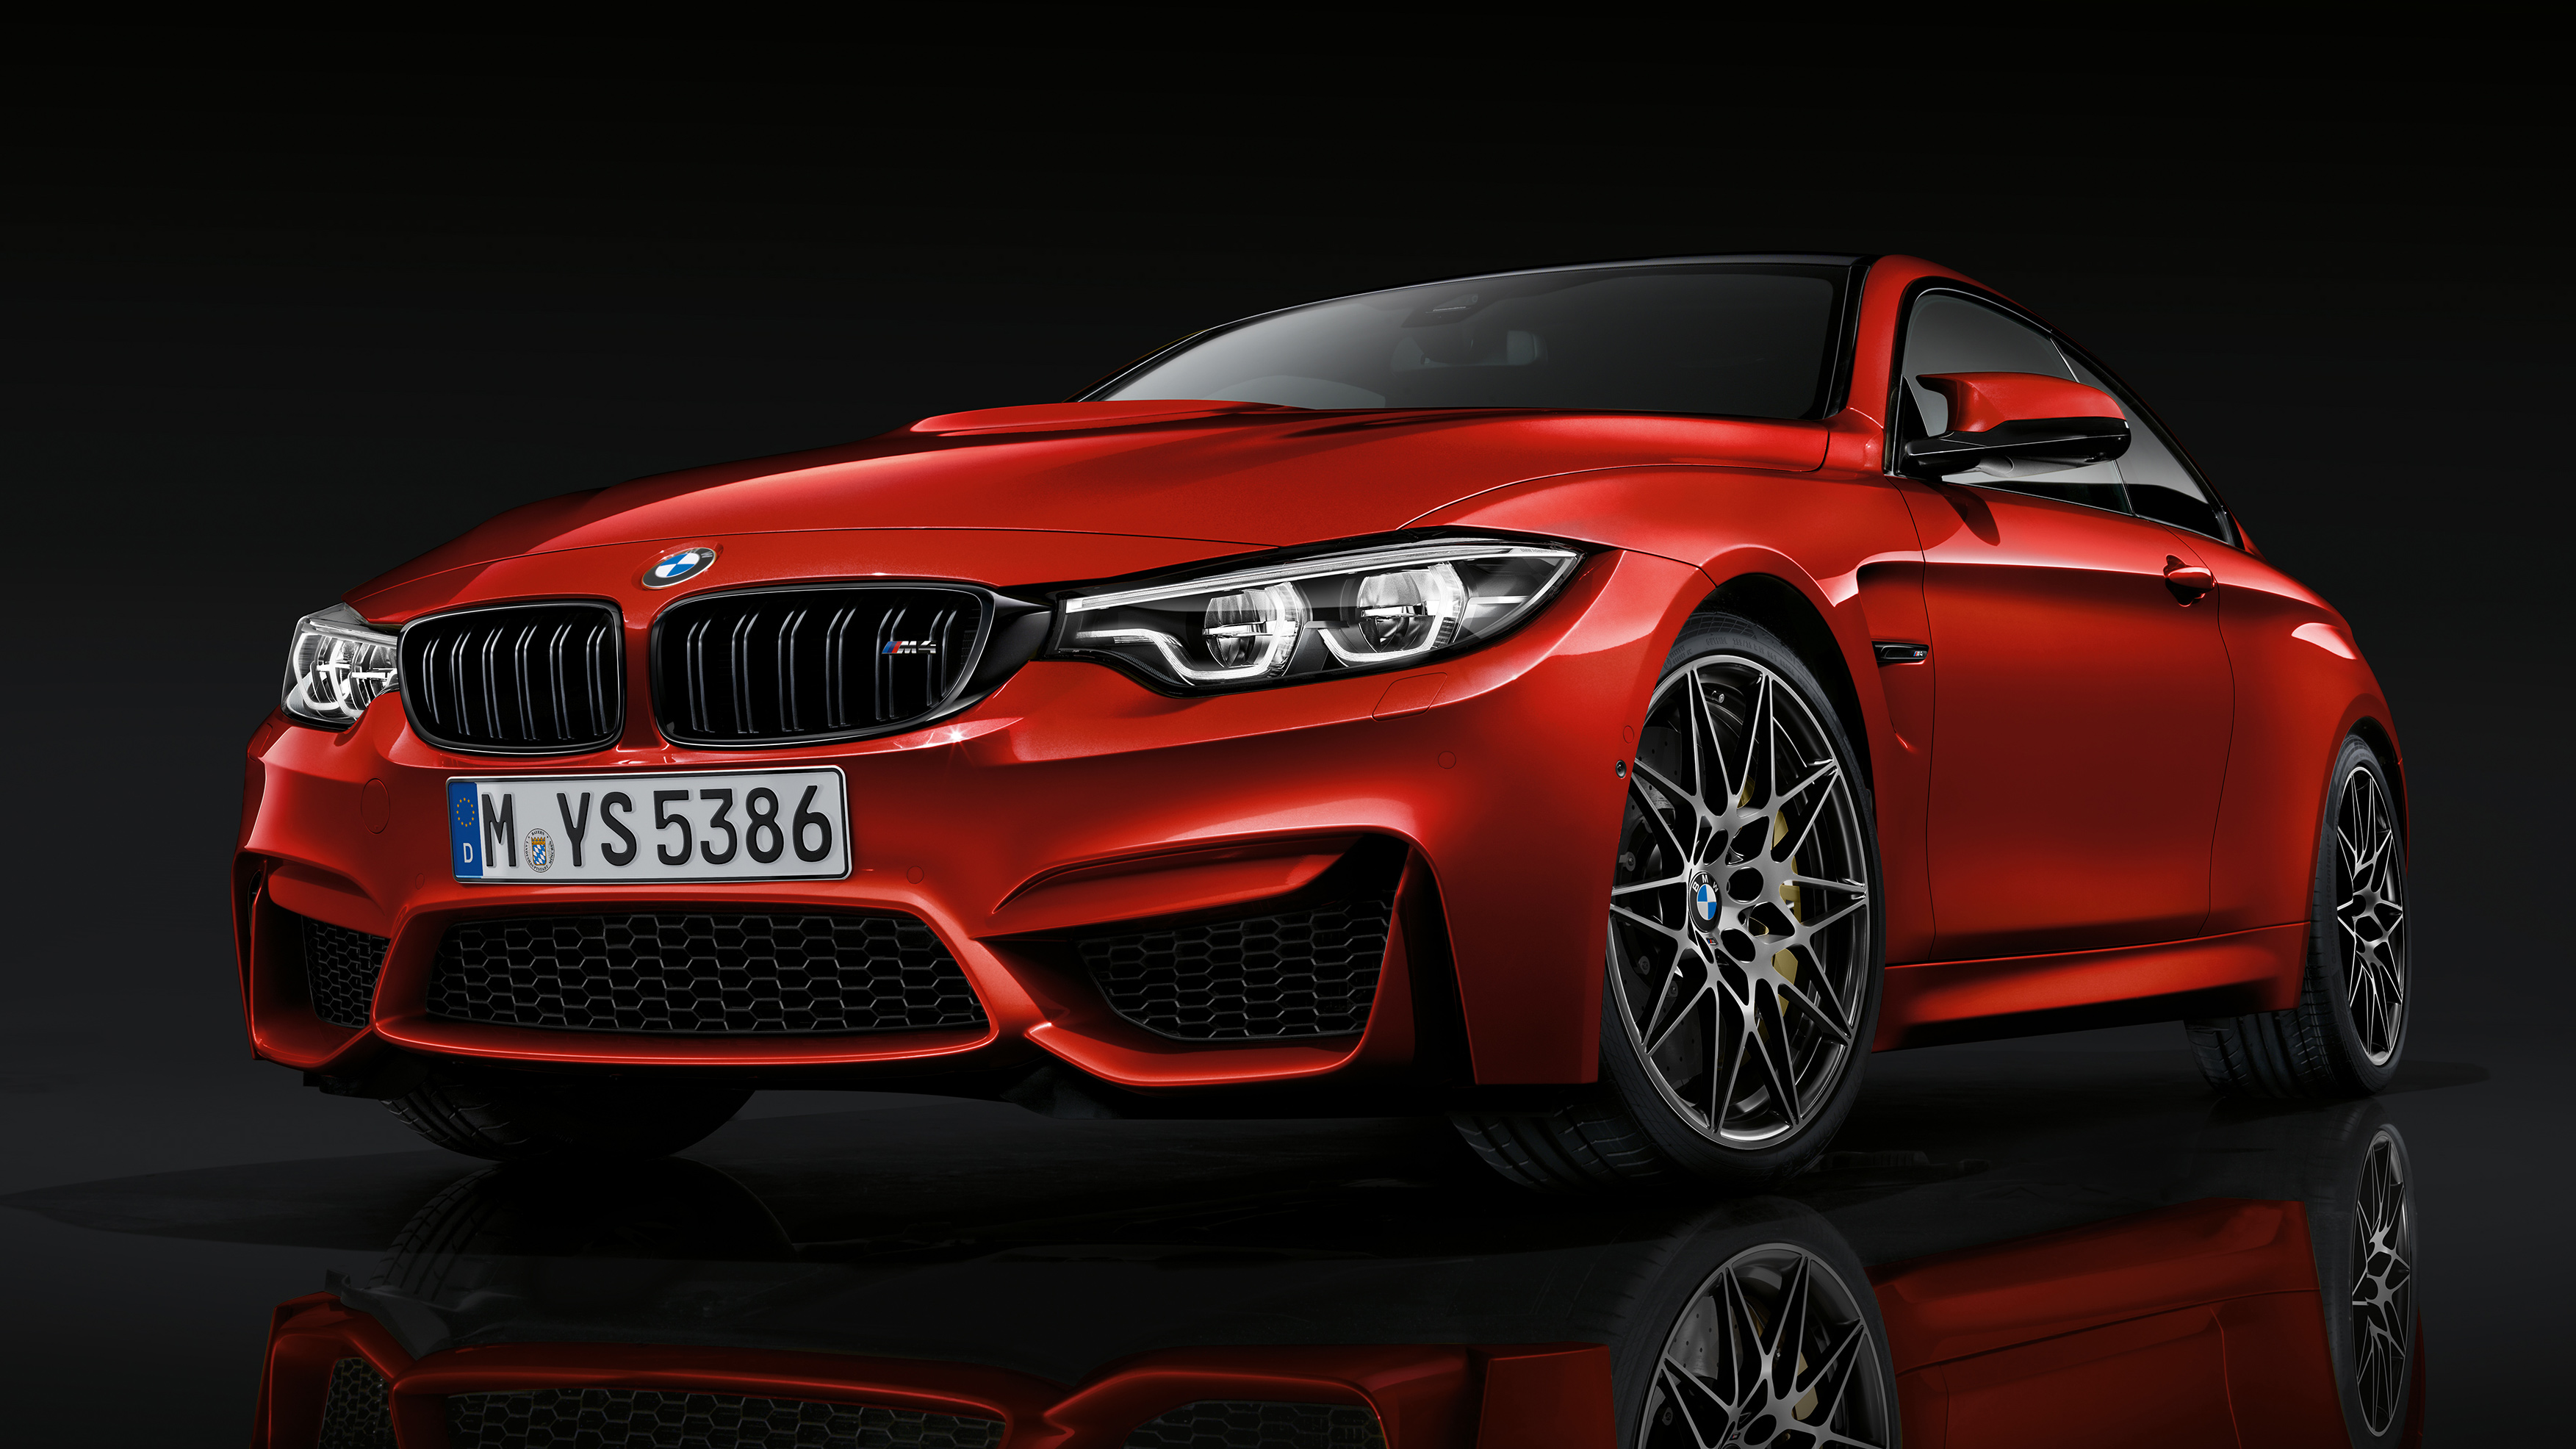 2017 Bmw M4 Coupe Wallpaper Hd Car Wallpapers Id 7530